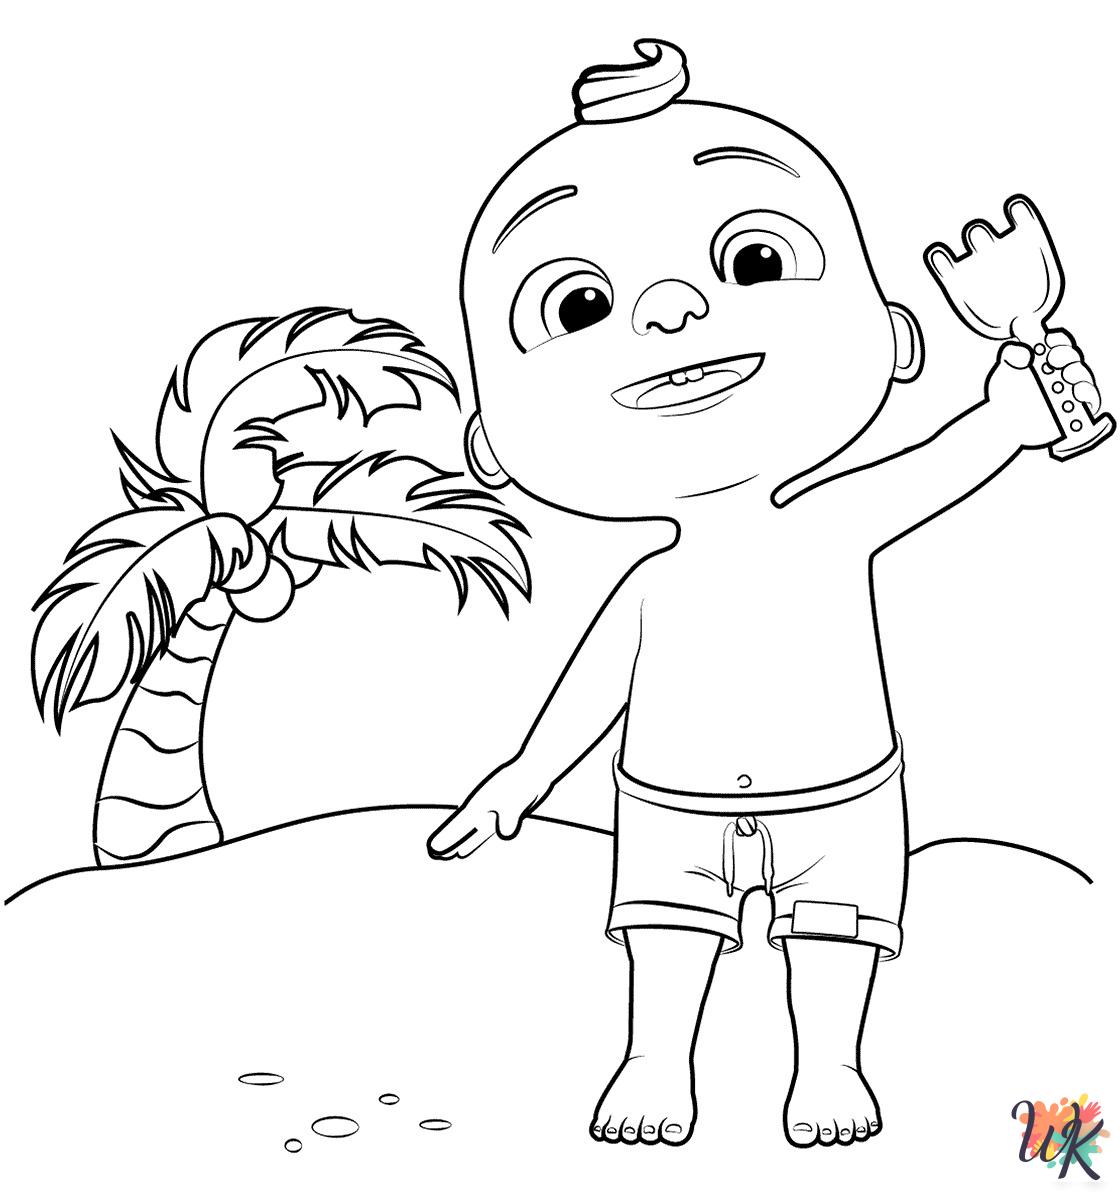 merry Cocomelon coloring pages